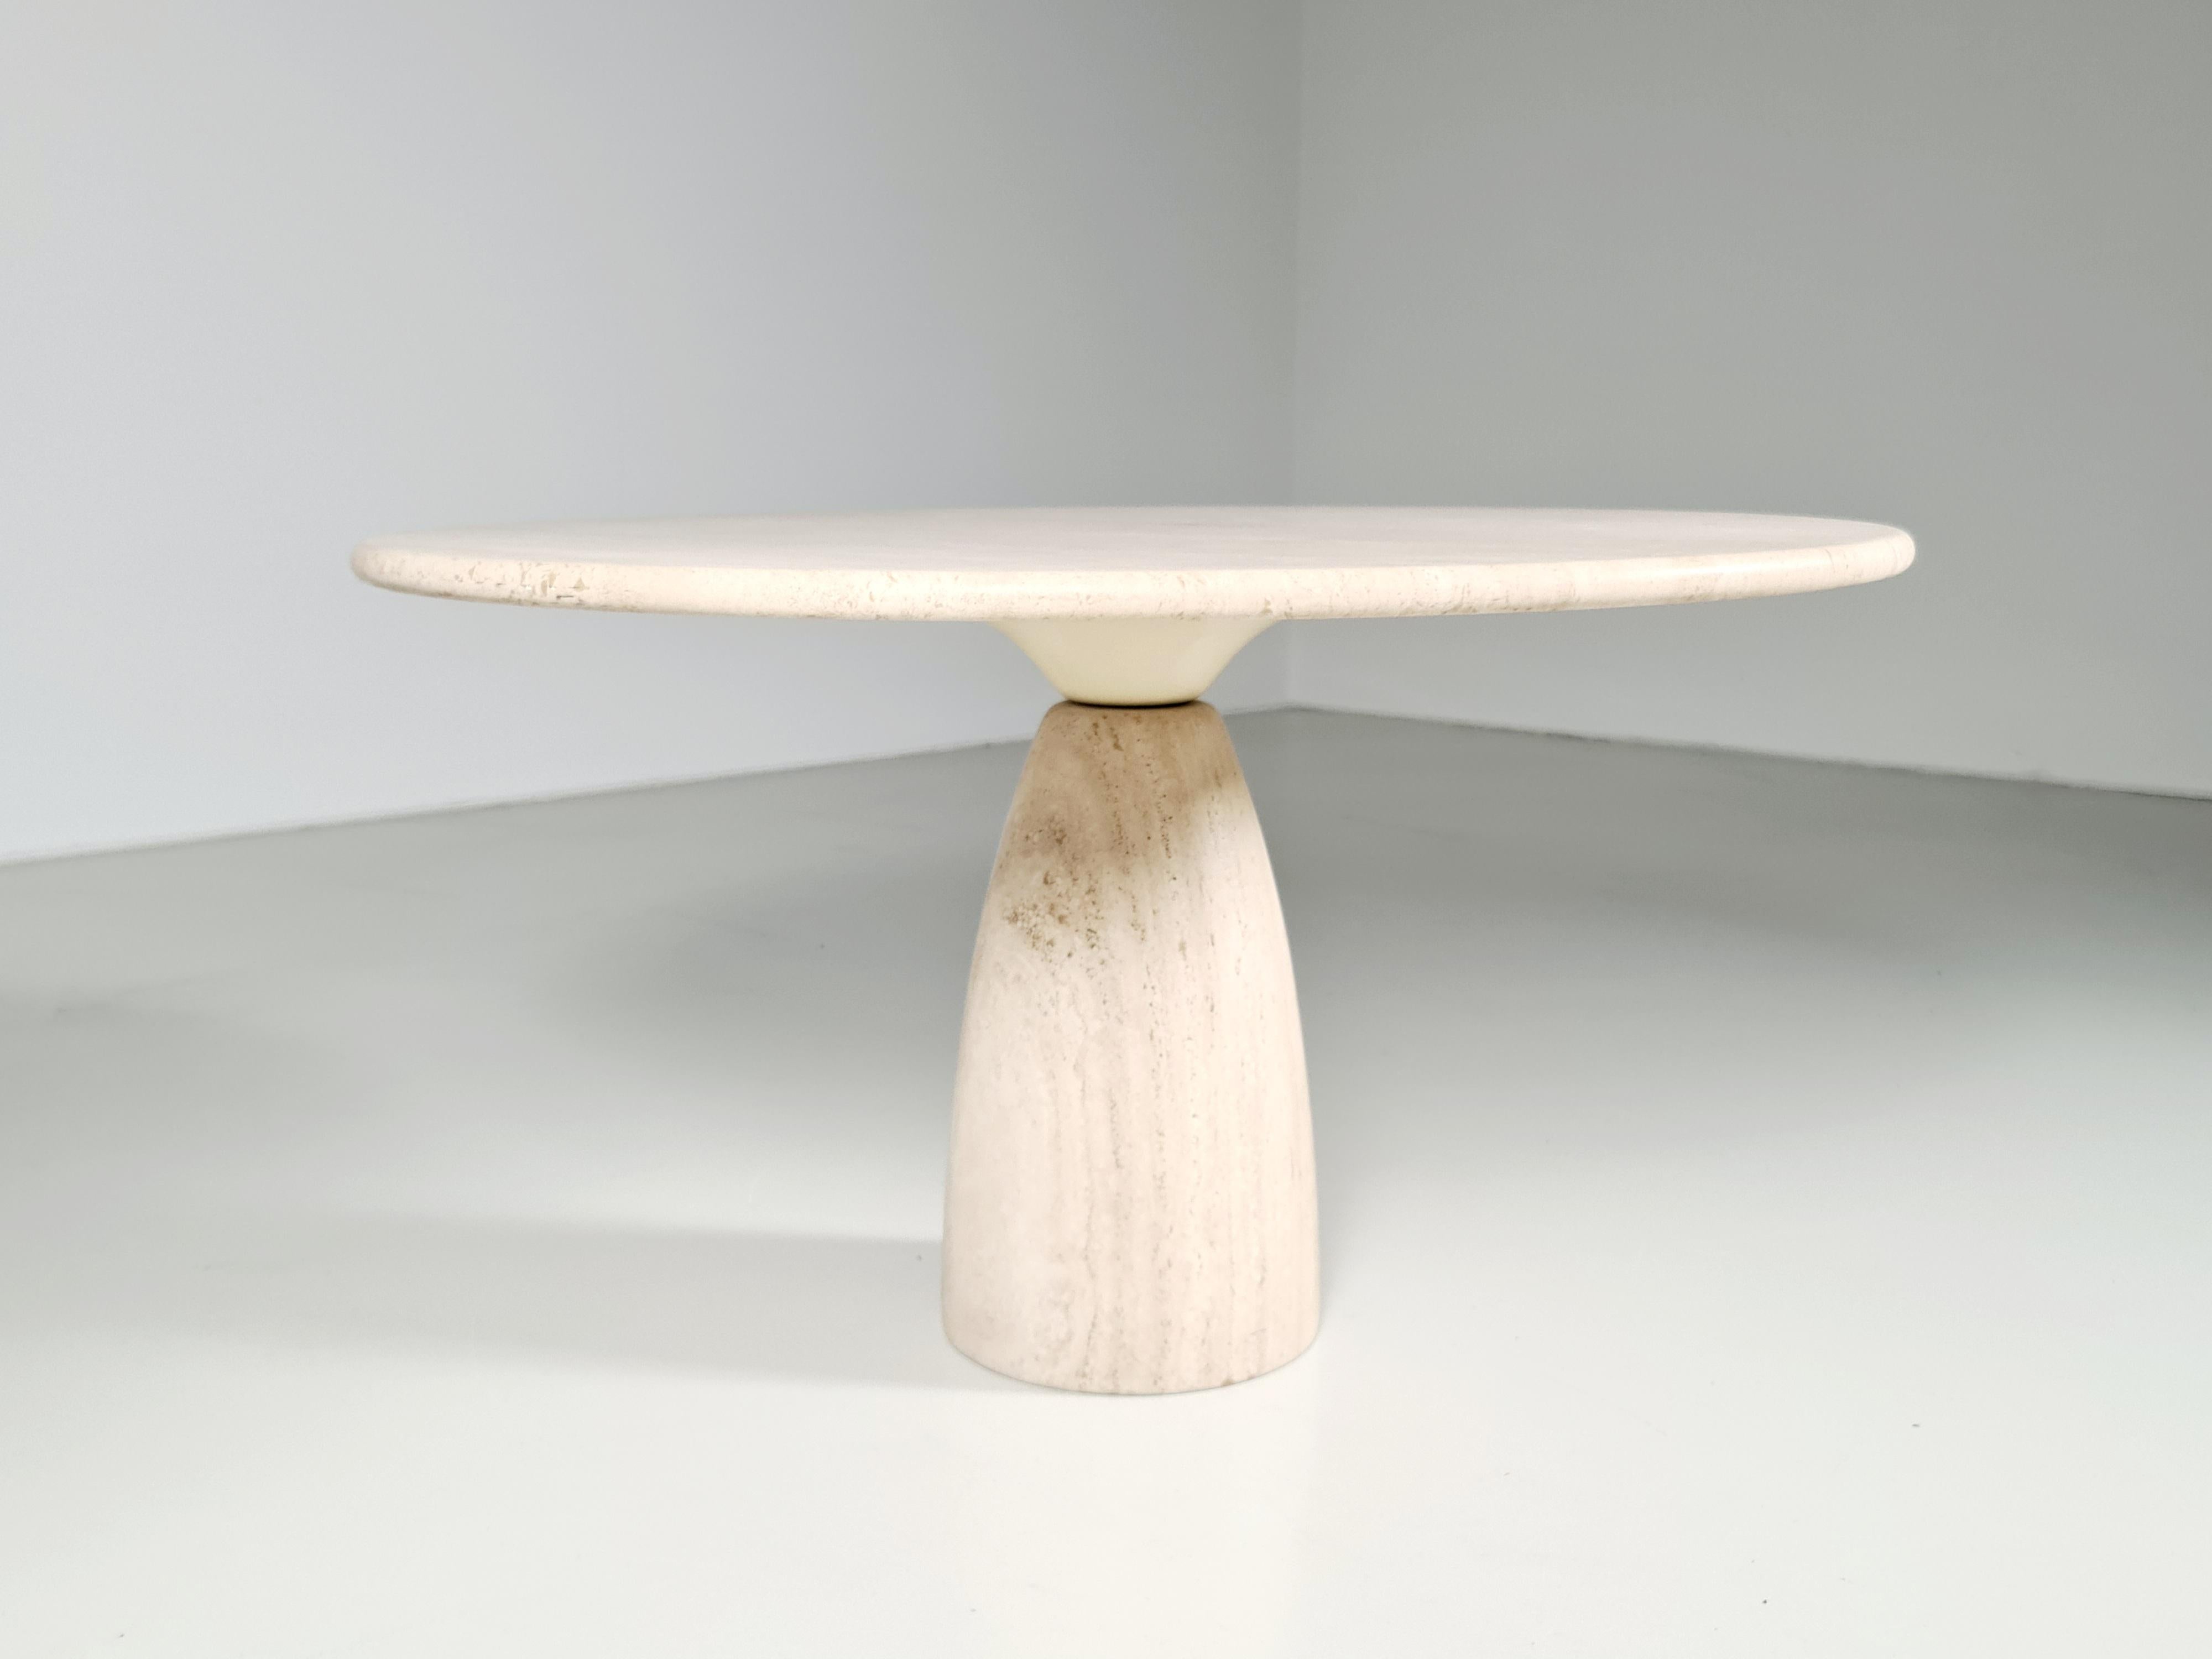 Finale 1790 travertine dining table by German designer Peter Draenert. From the 1970s.
The pale beige travertine top rests on a tear drop shaped pedestal that is designed with a lacquered metal inverted form that is then pinned to the wood support